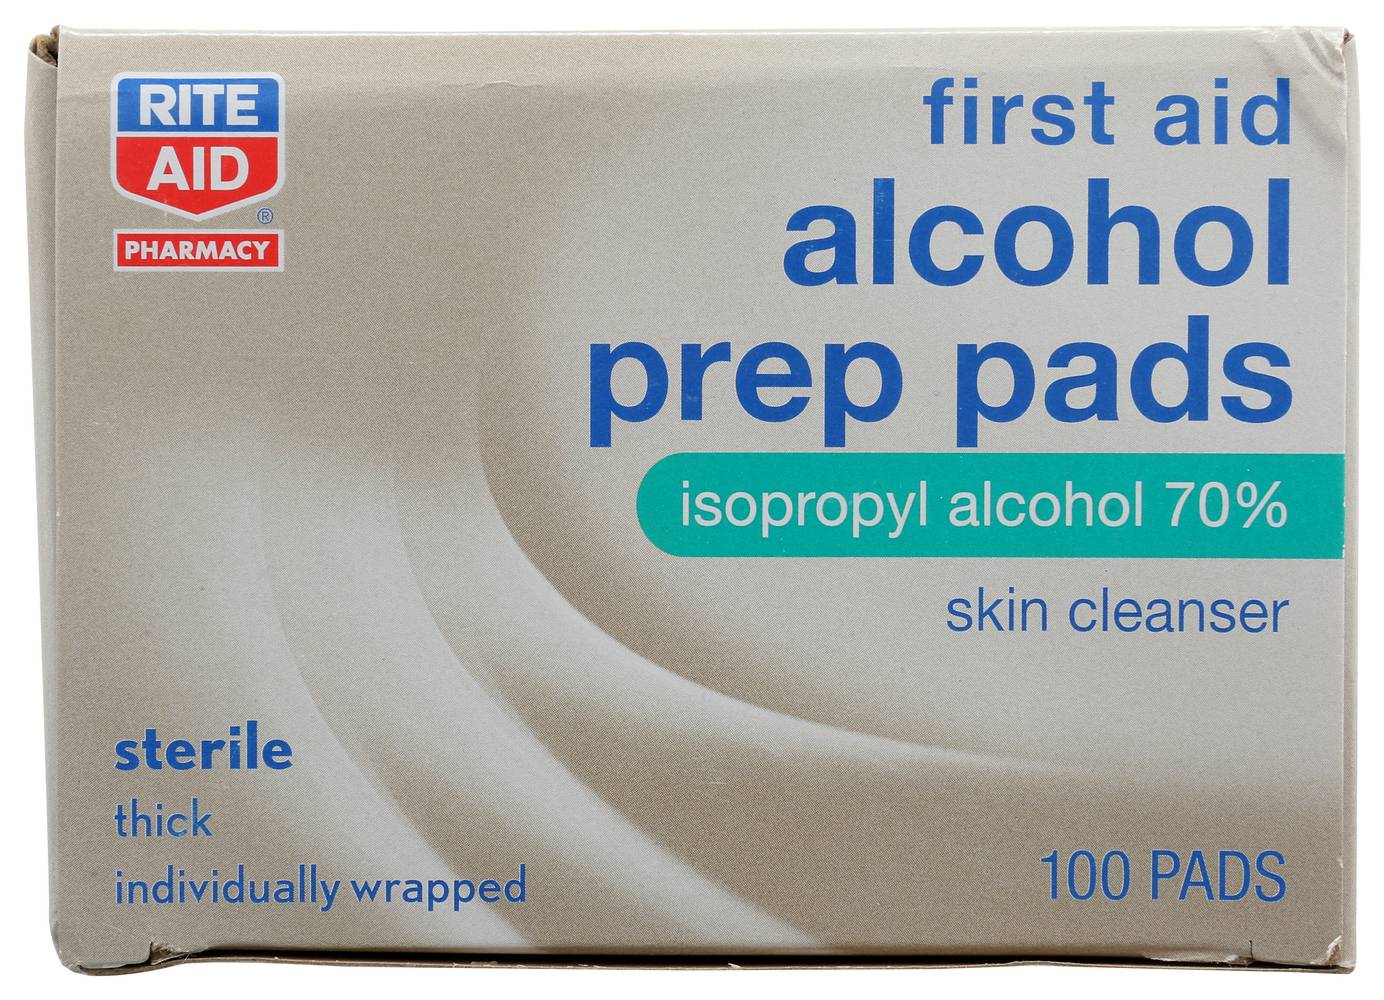 Rite Aid First Aid Alcohol Prep Pads (100 ct)